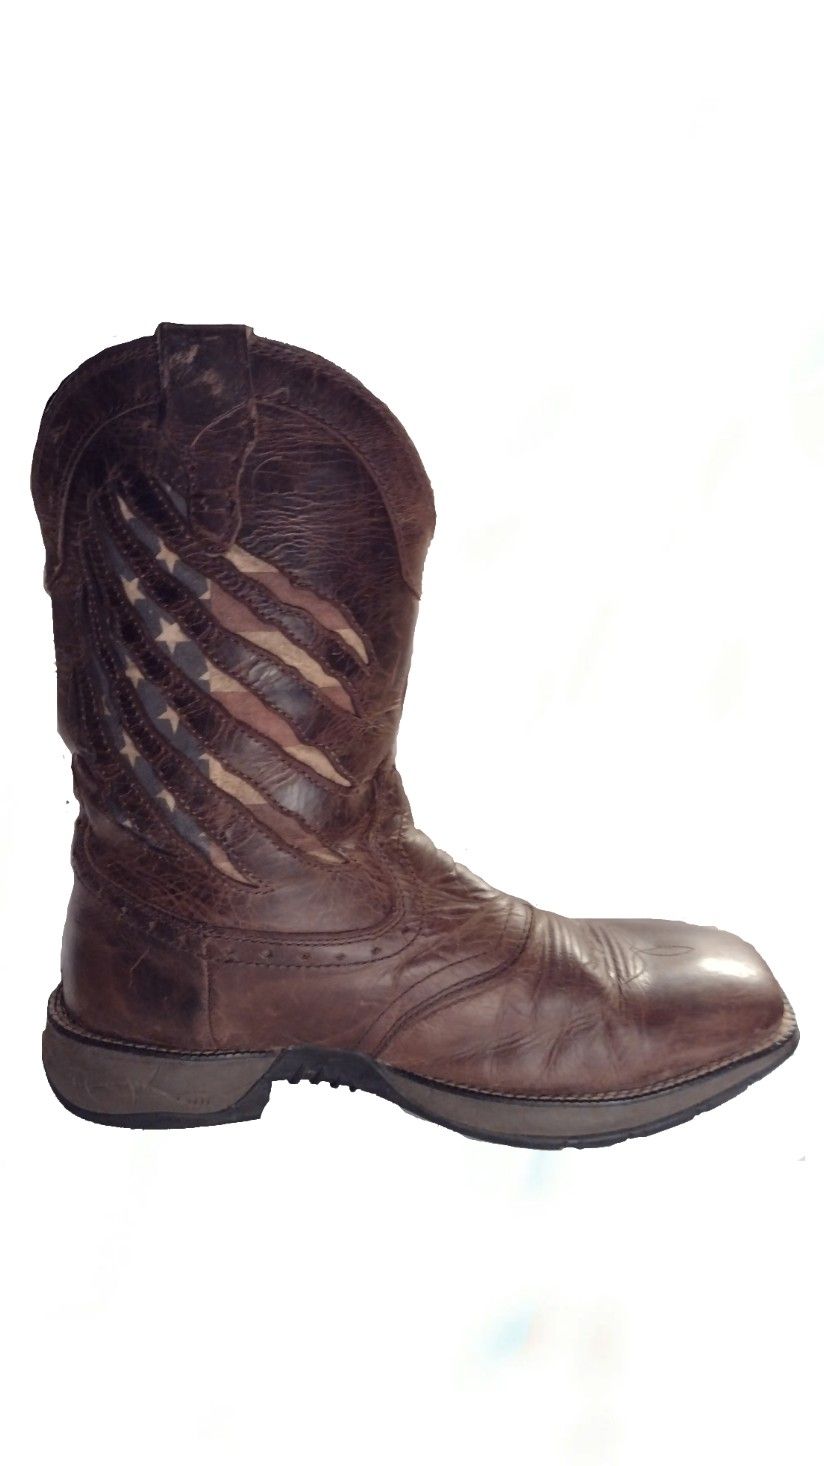 Cody James Xero Gravity Brown Leather Square Toe Boots, Men’s Size 14D